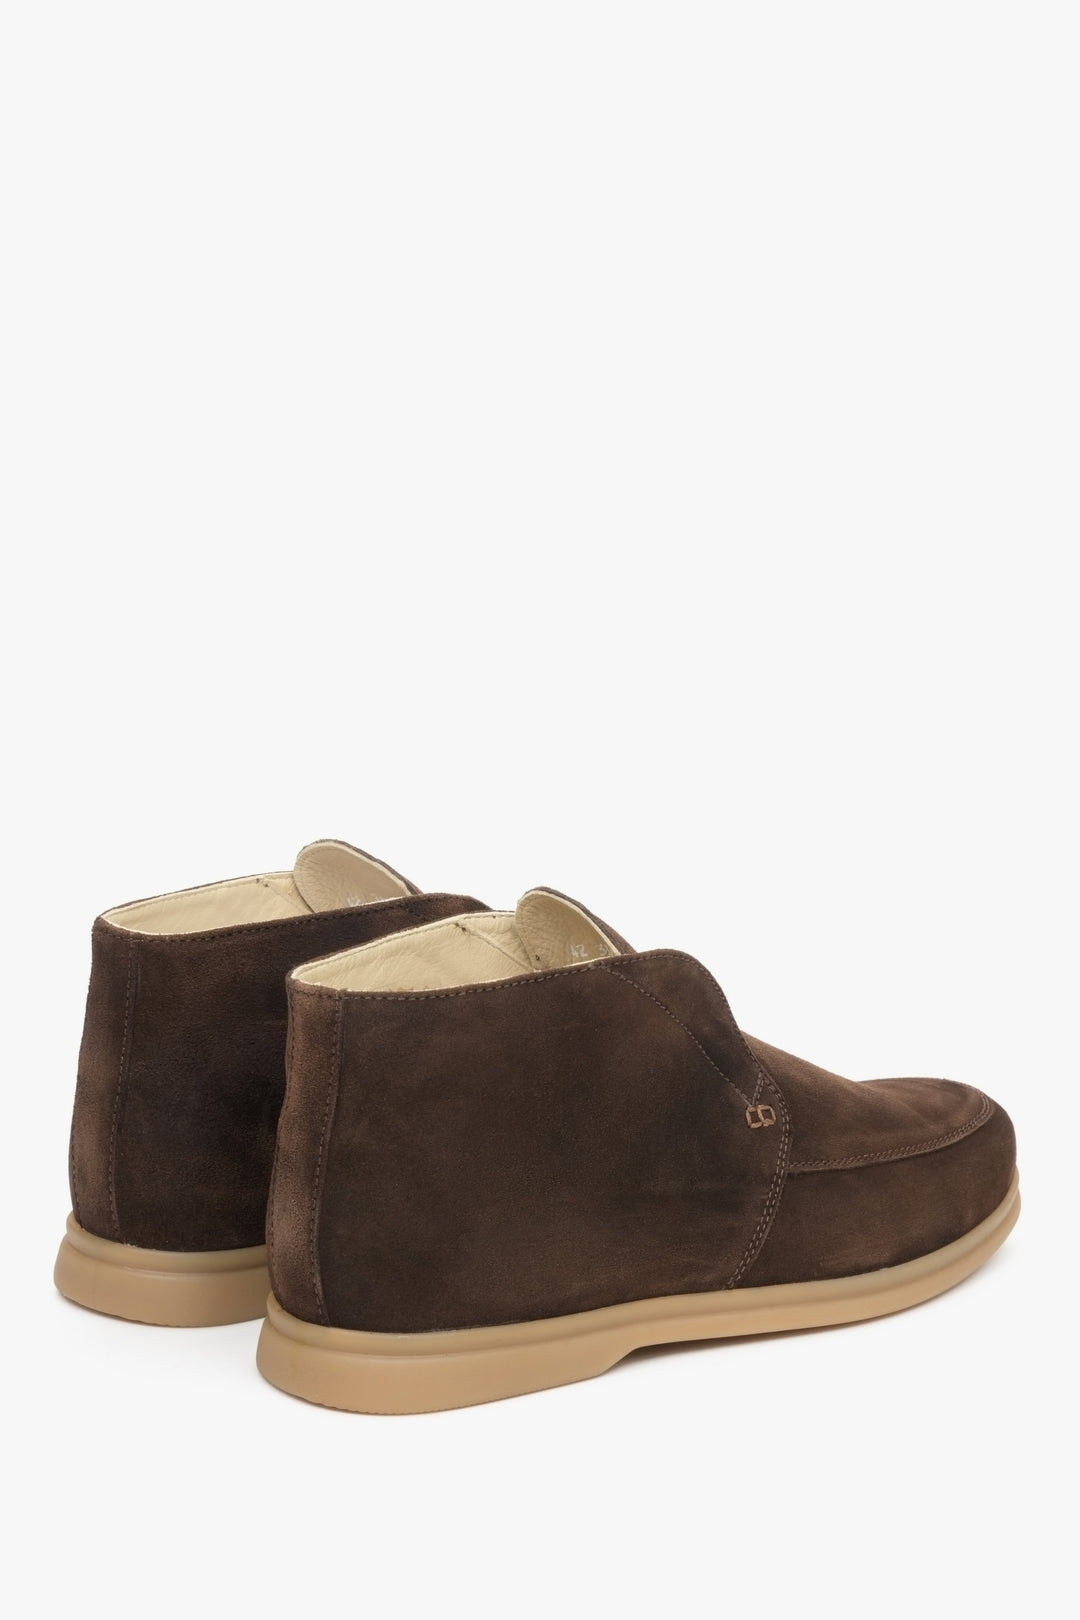 Men's slip-on autumn suede ankle boots by Estro - close-up on the rear part of the shoe: the heel and the side seam.